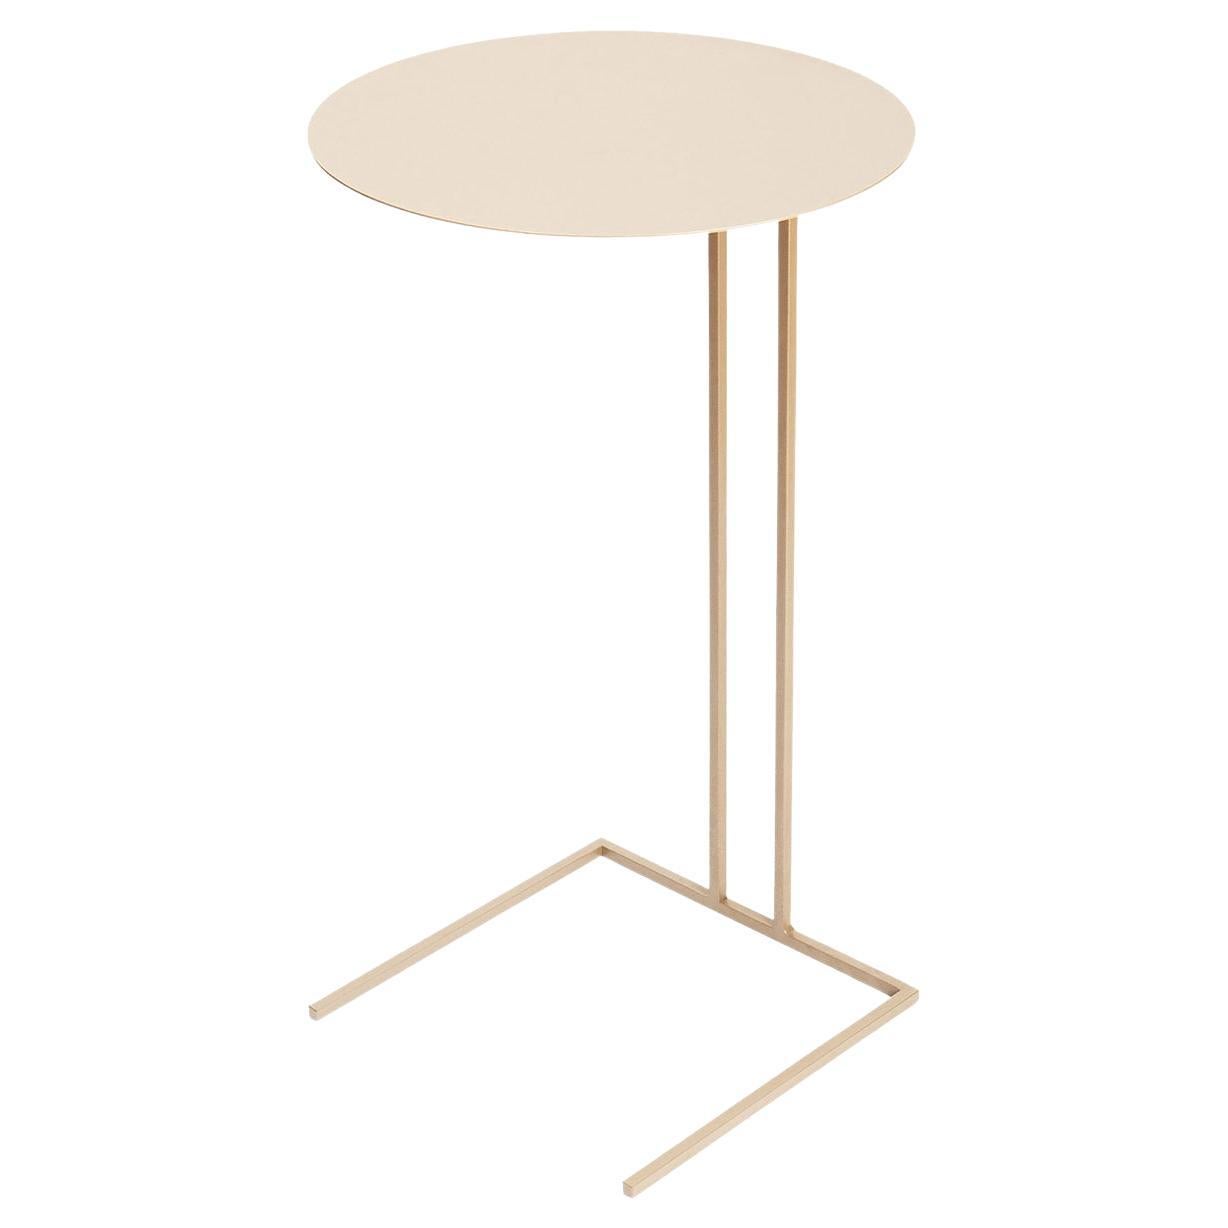 Shedir Round Side Table For Sale